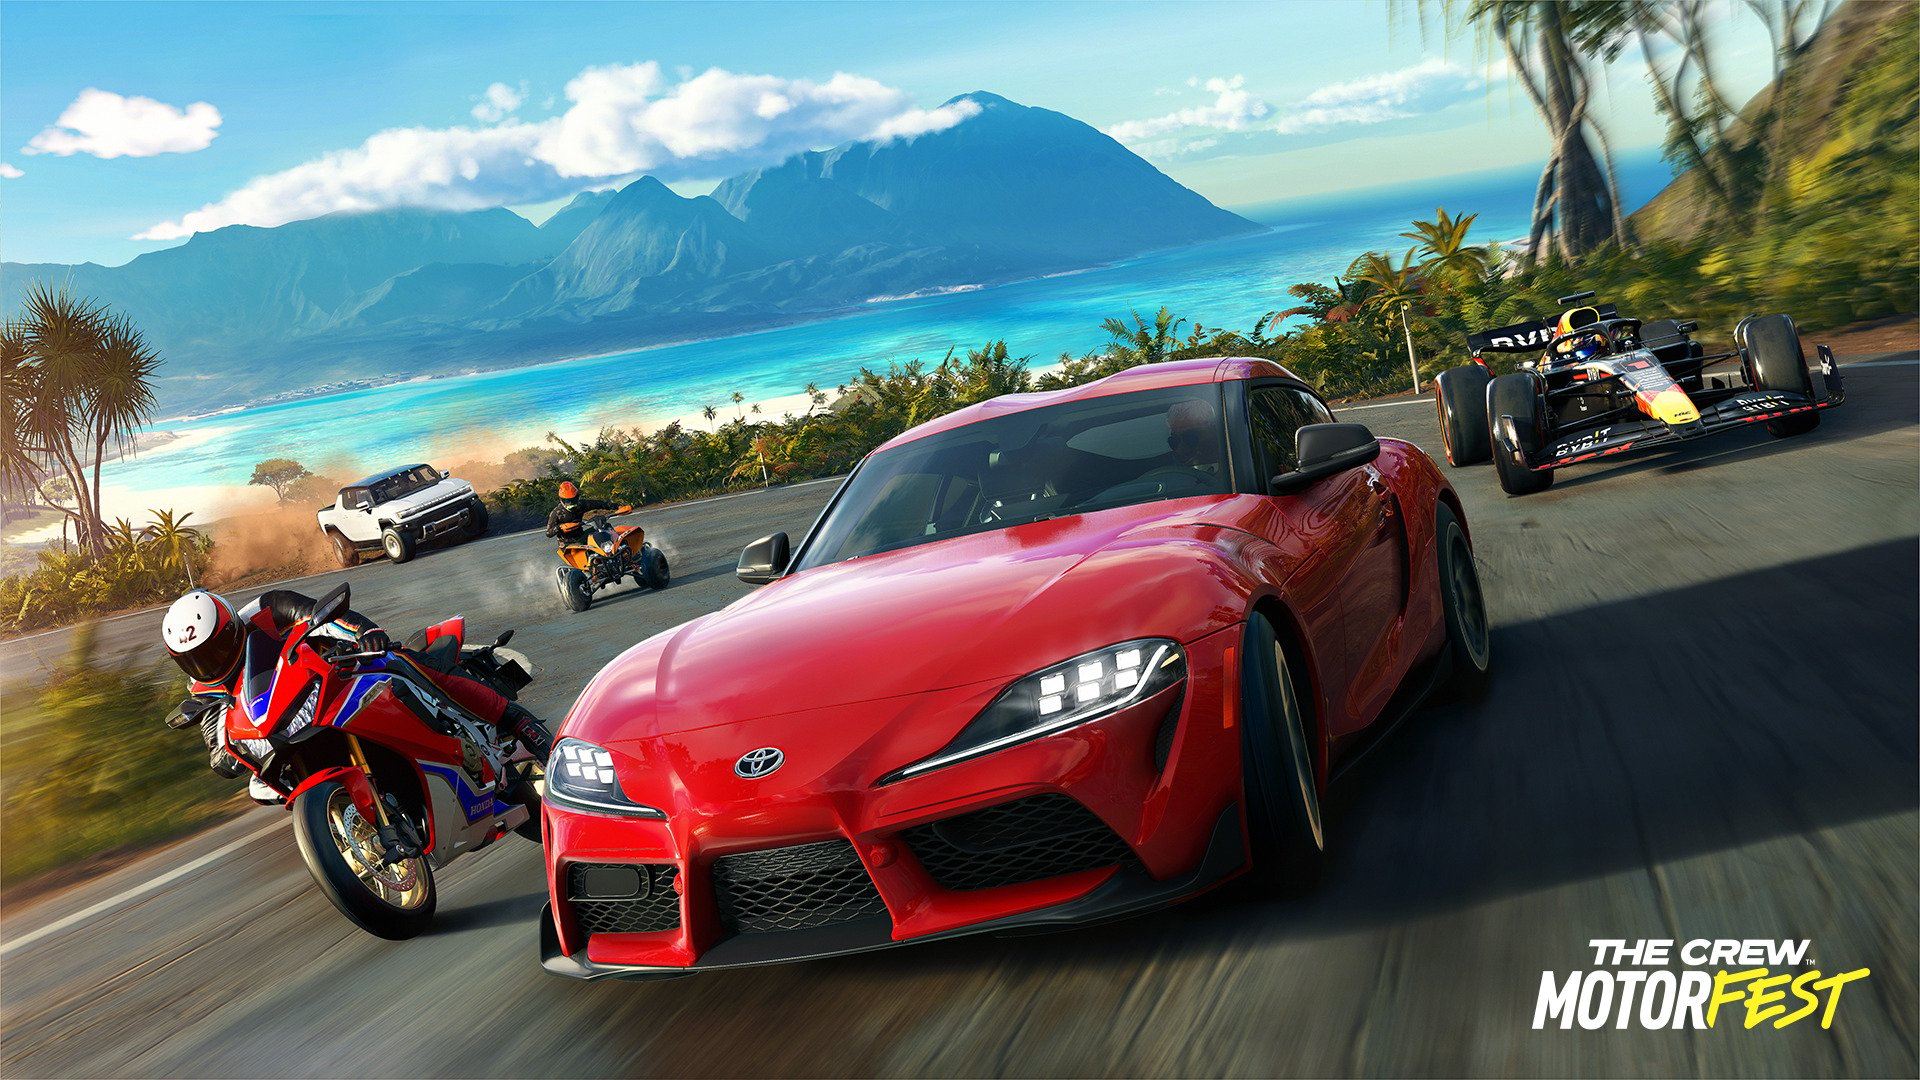 The Crew Motorfest Guide – How To Farm Bucks and Purchase Crew Credits